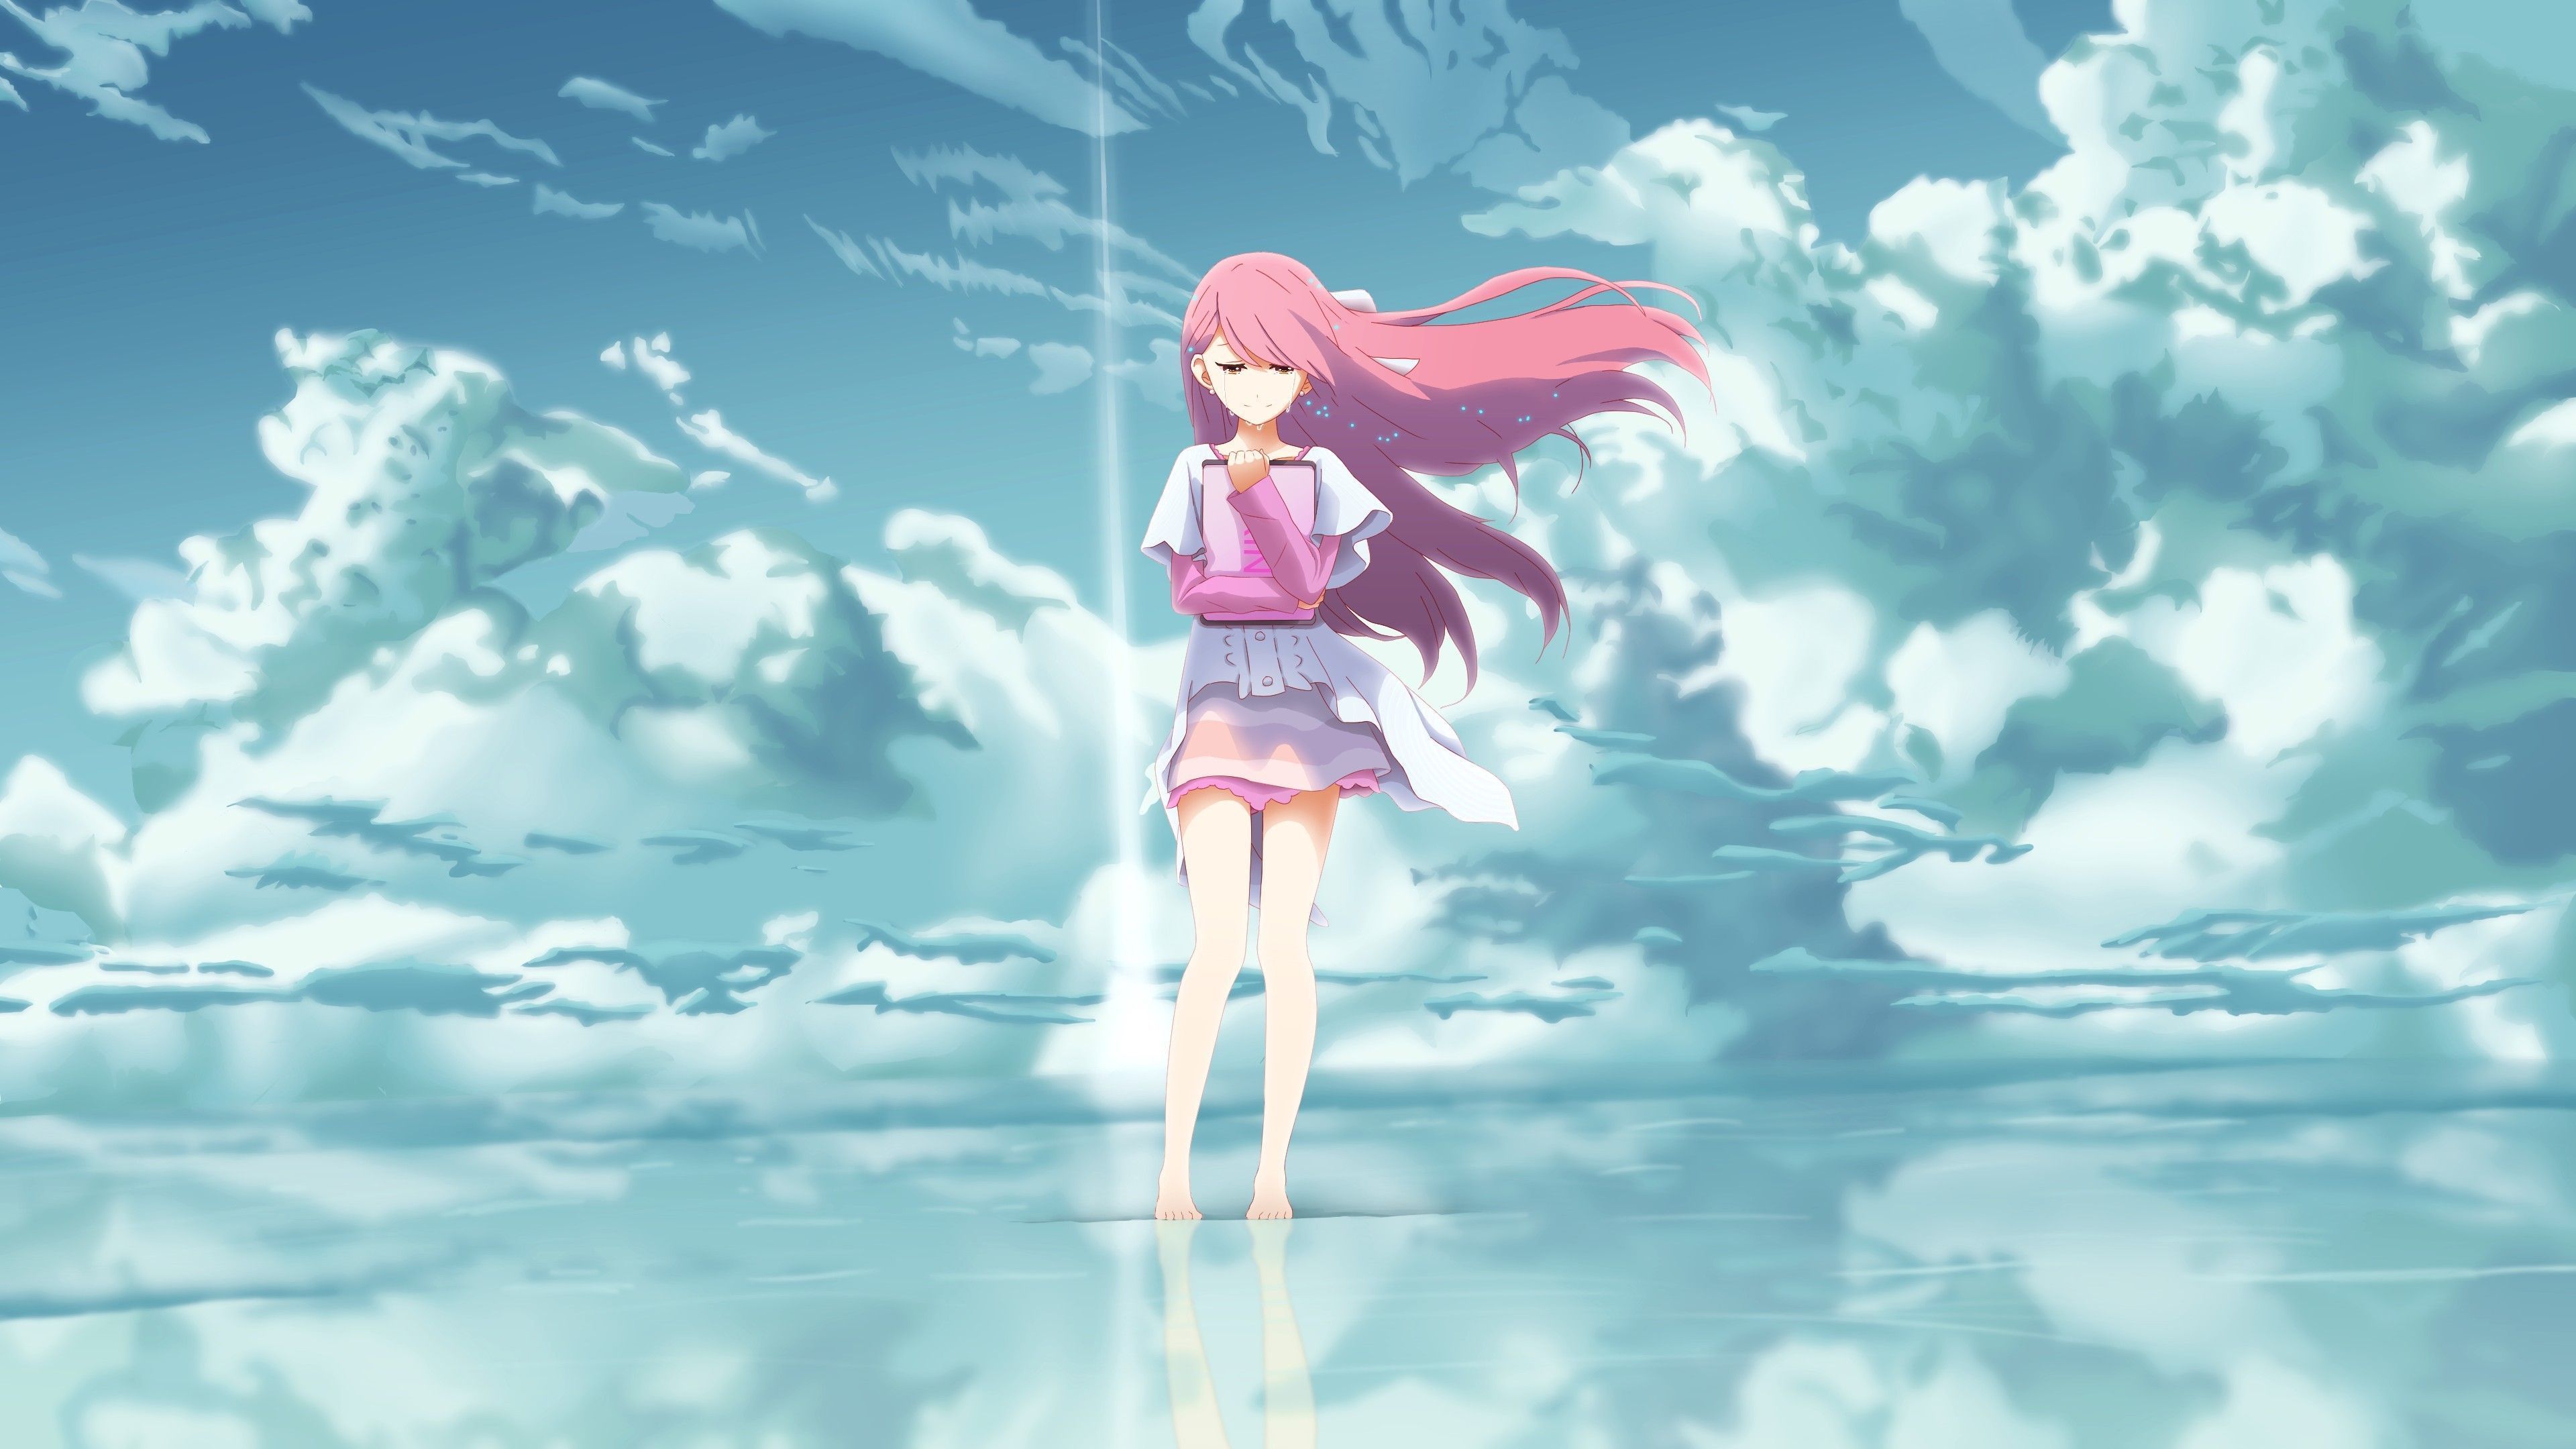 A girl with pink hair is standing in the water - Anime girl, anime